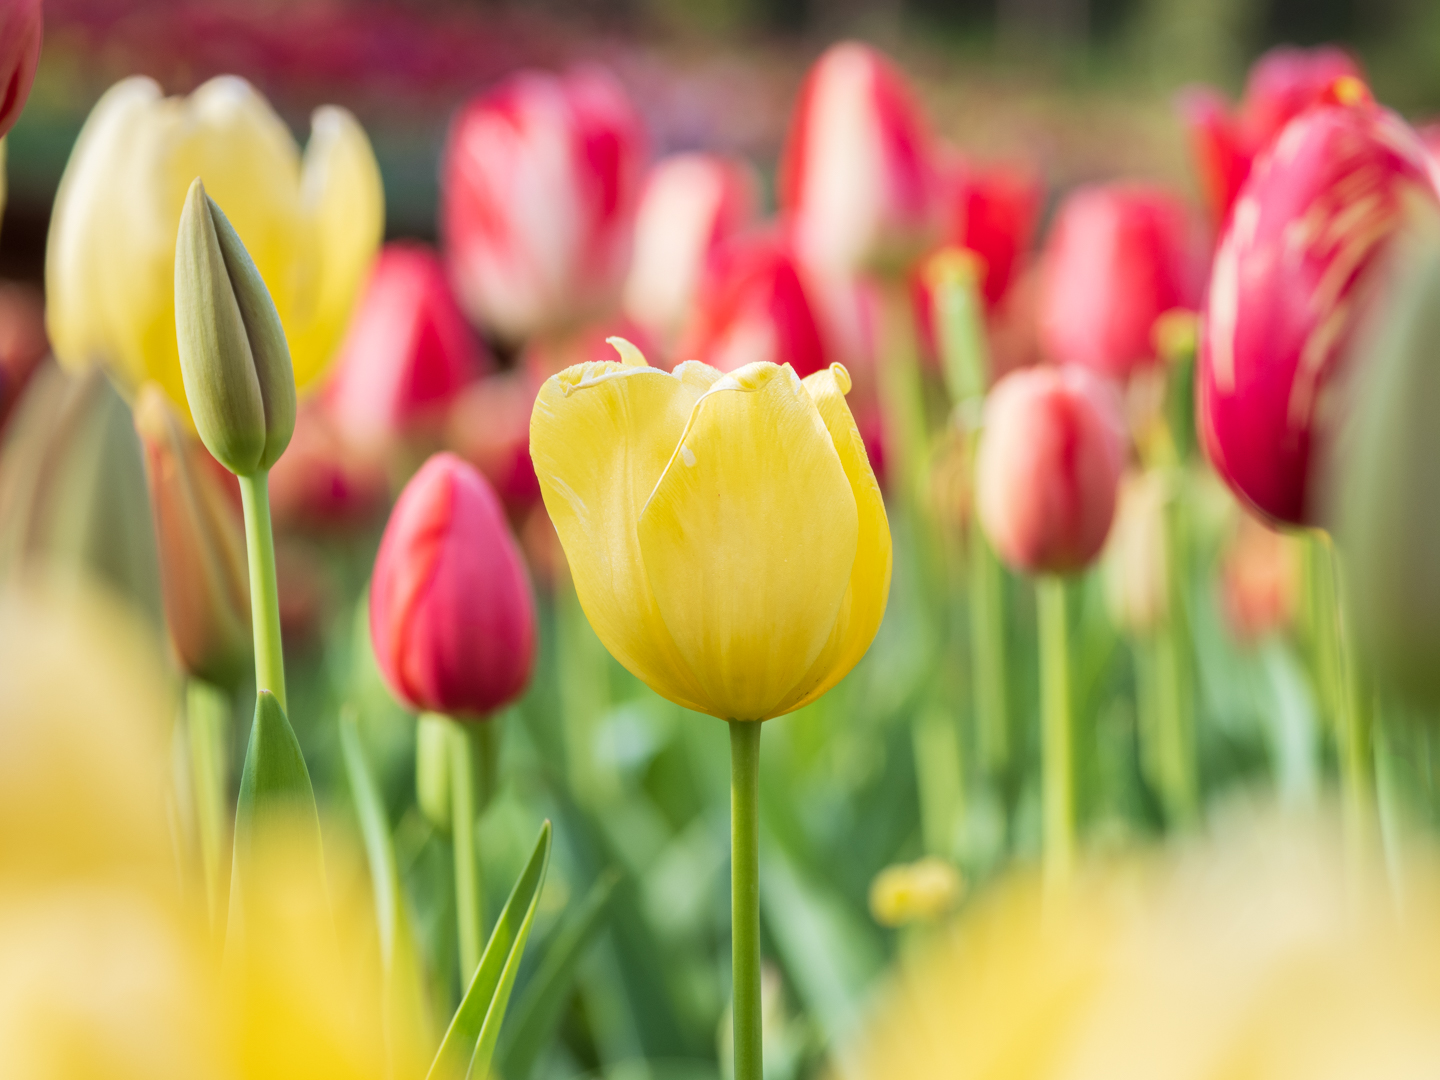 Tulip festival - Activities for the disabled Araluen